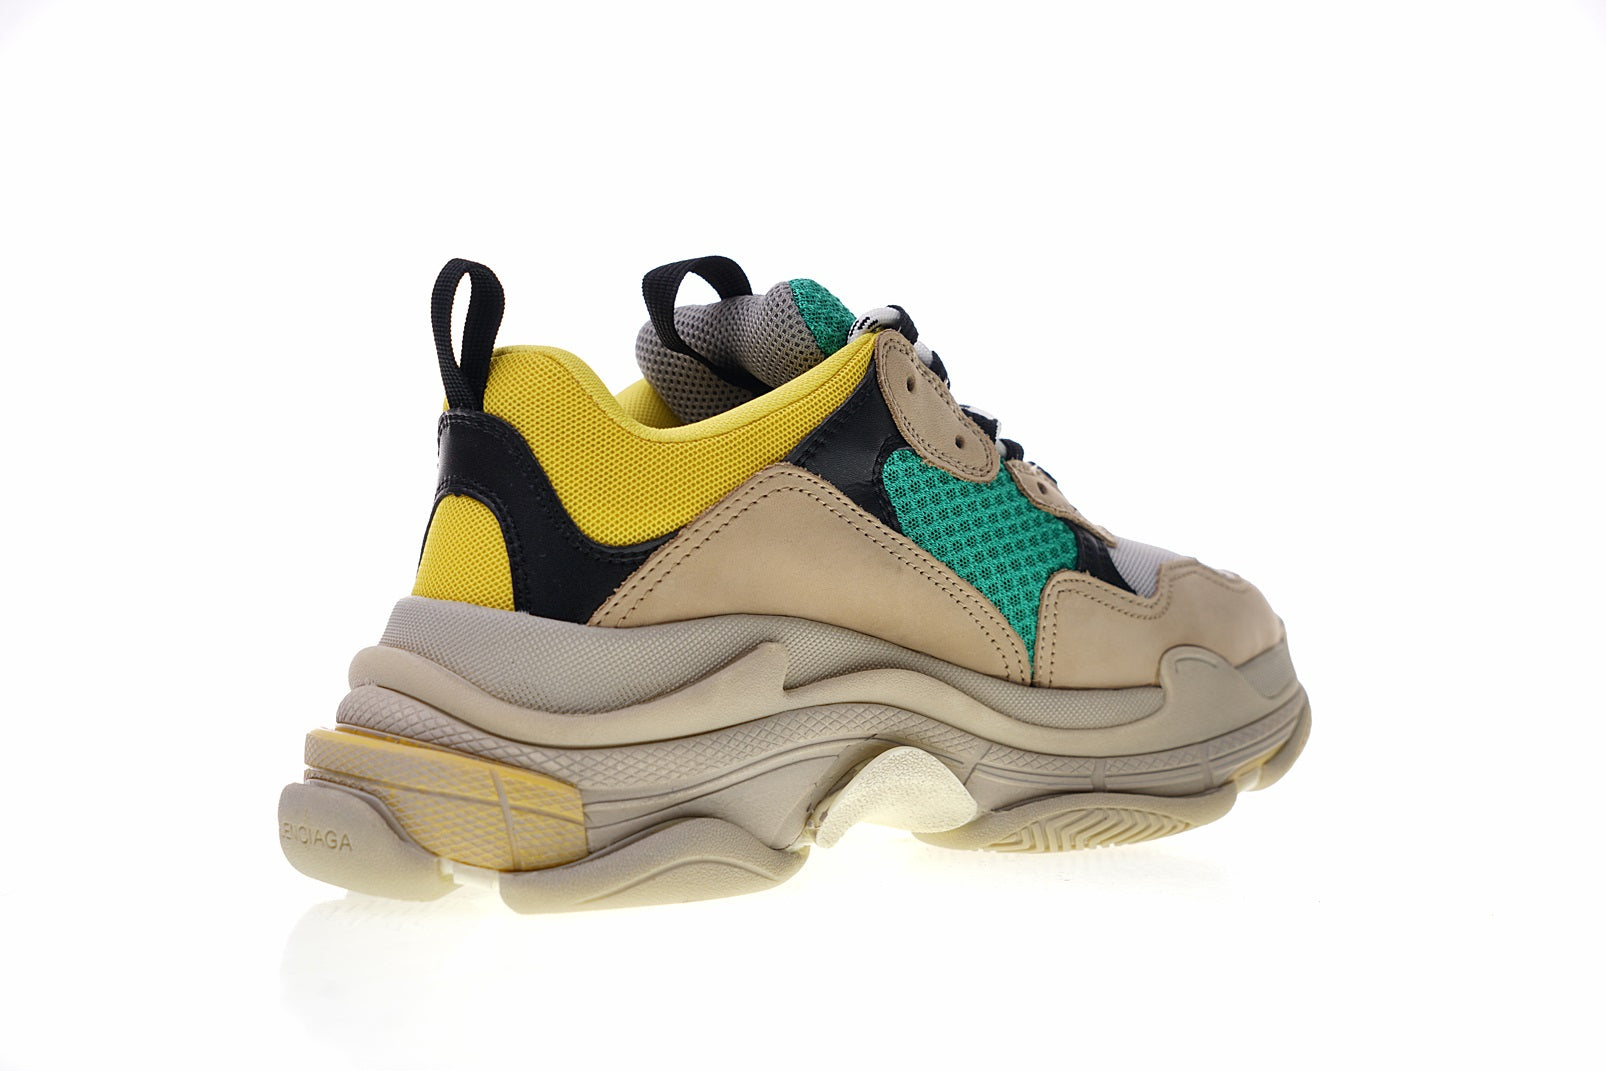 Triple s green and yellow solid sole - whatever on 